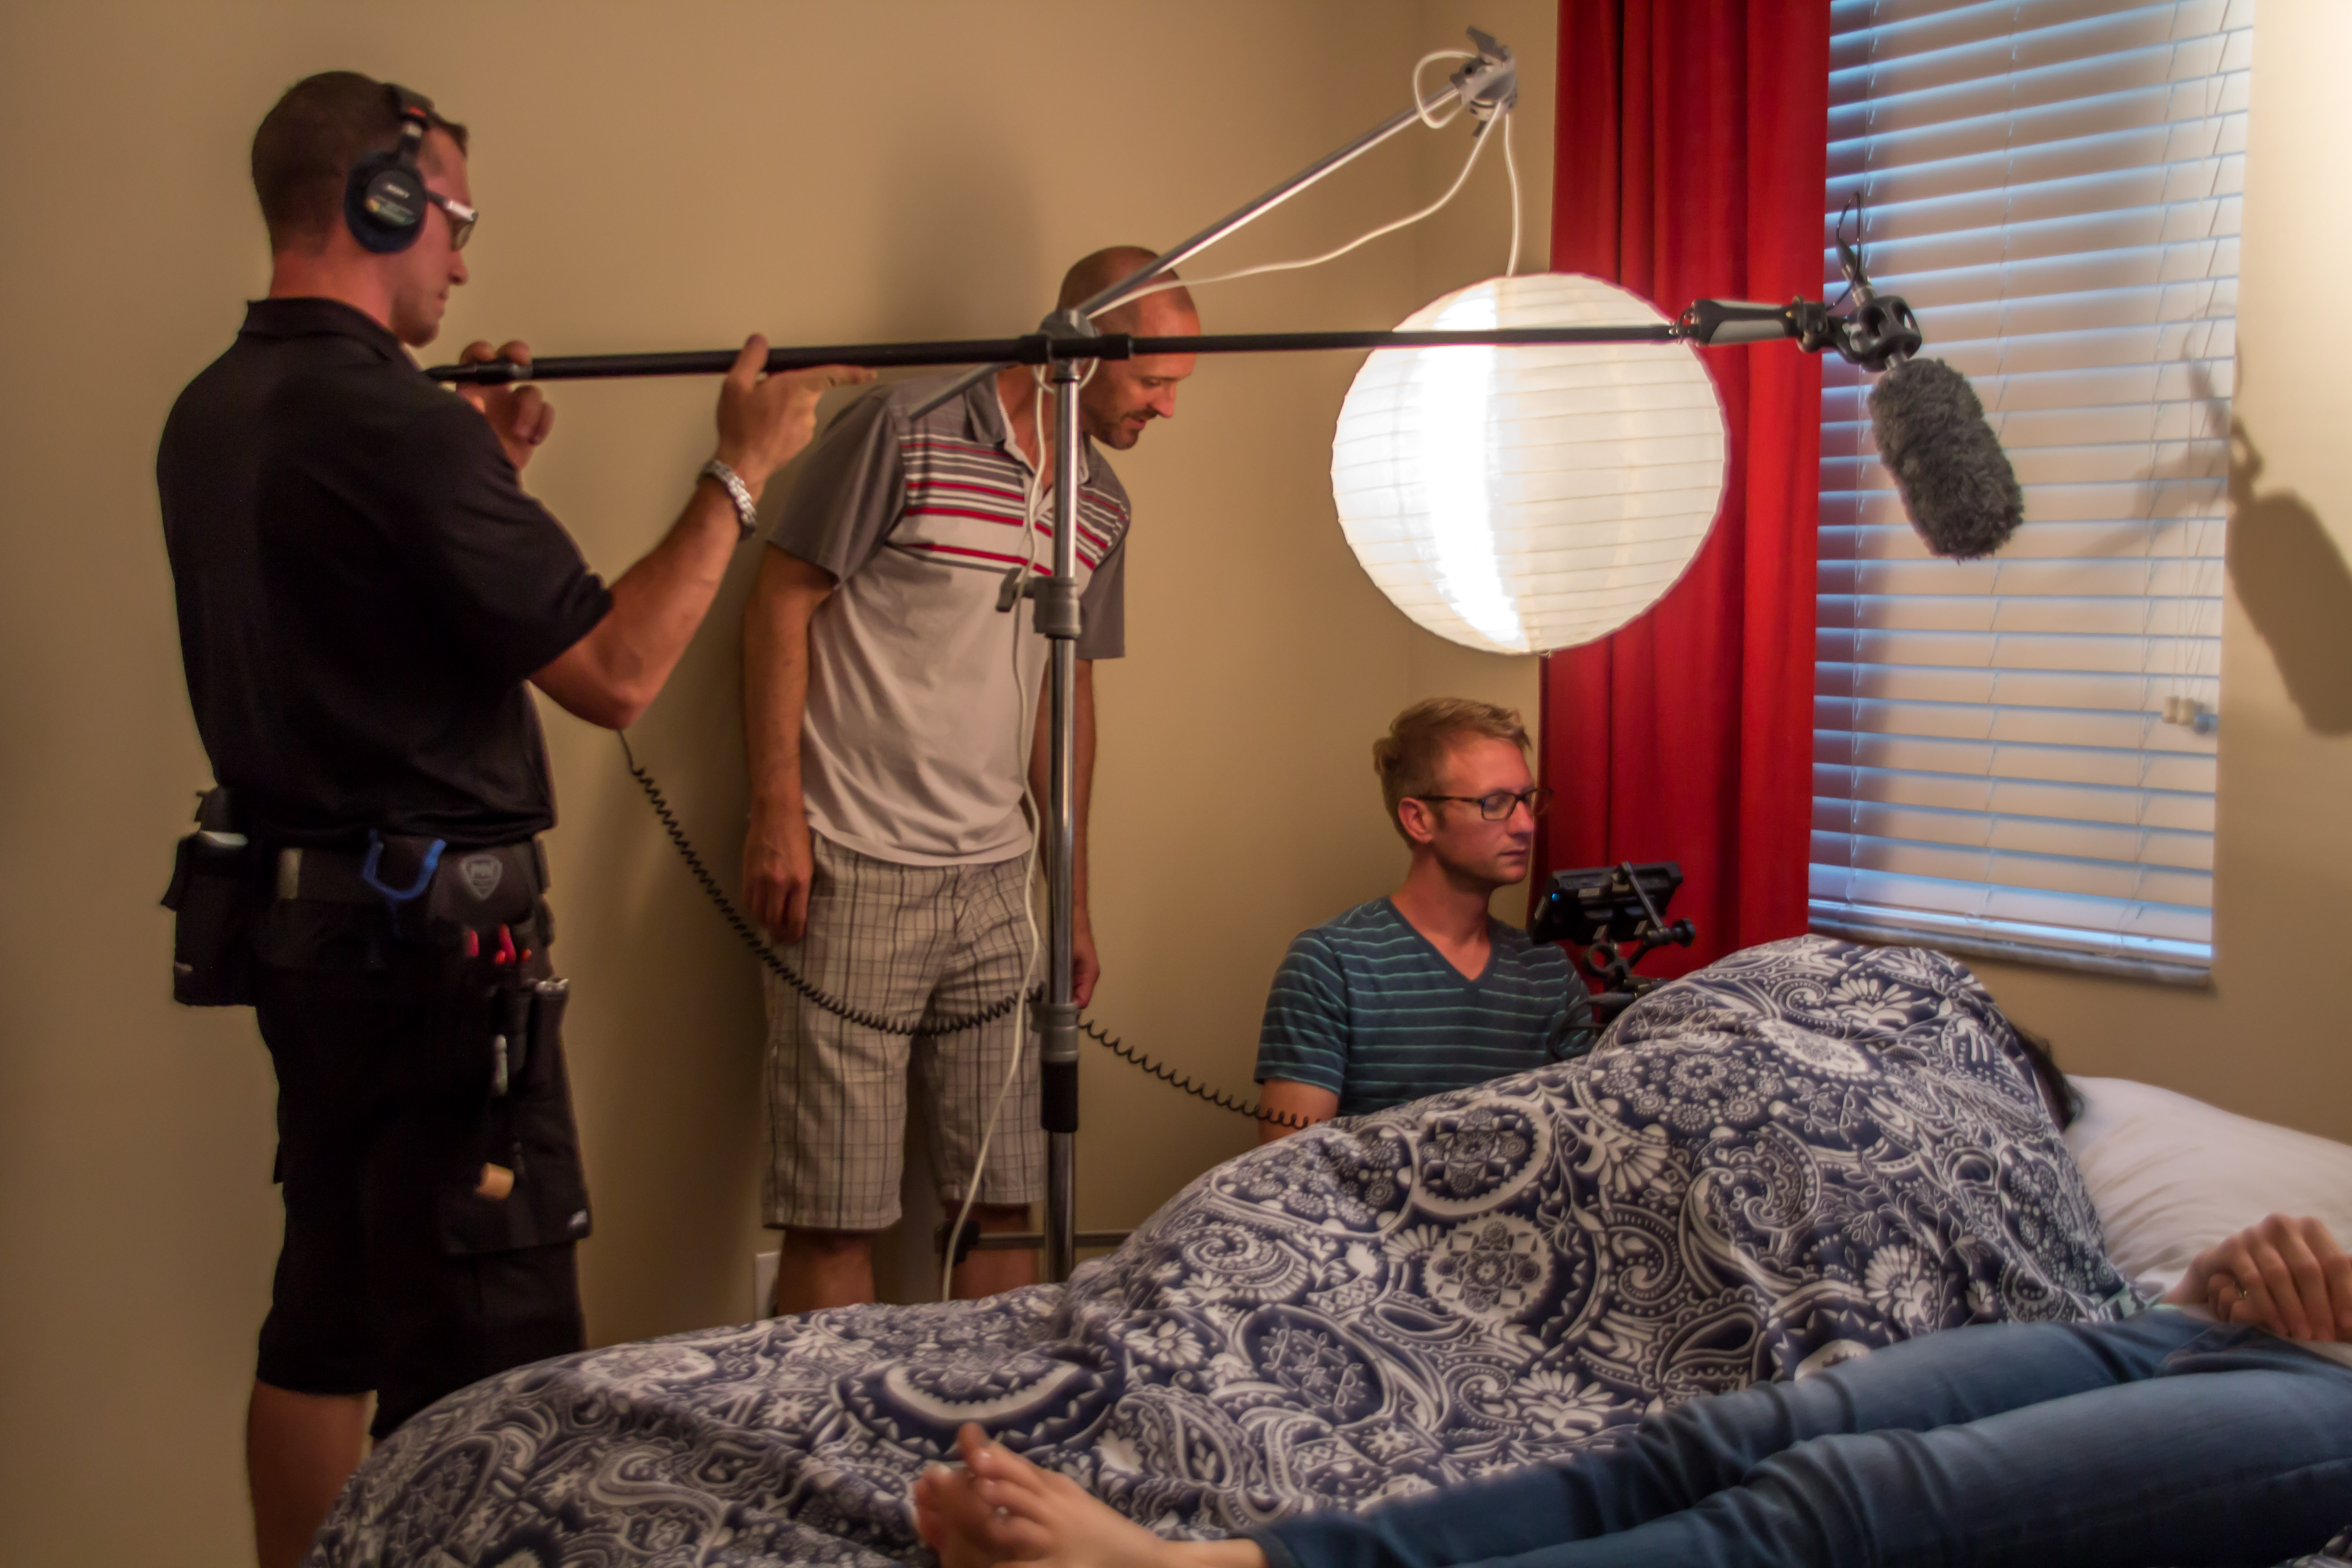 Director Trevor F. Ward behind the scenes with DP Ryan P. Dean and sound recordist Franklin Whitlatch on a commercial shoot.